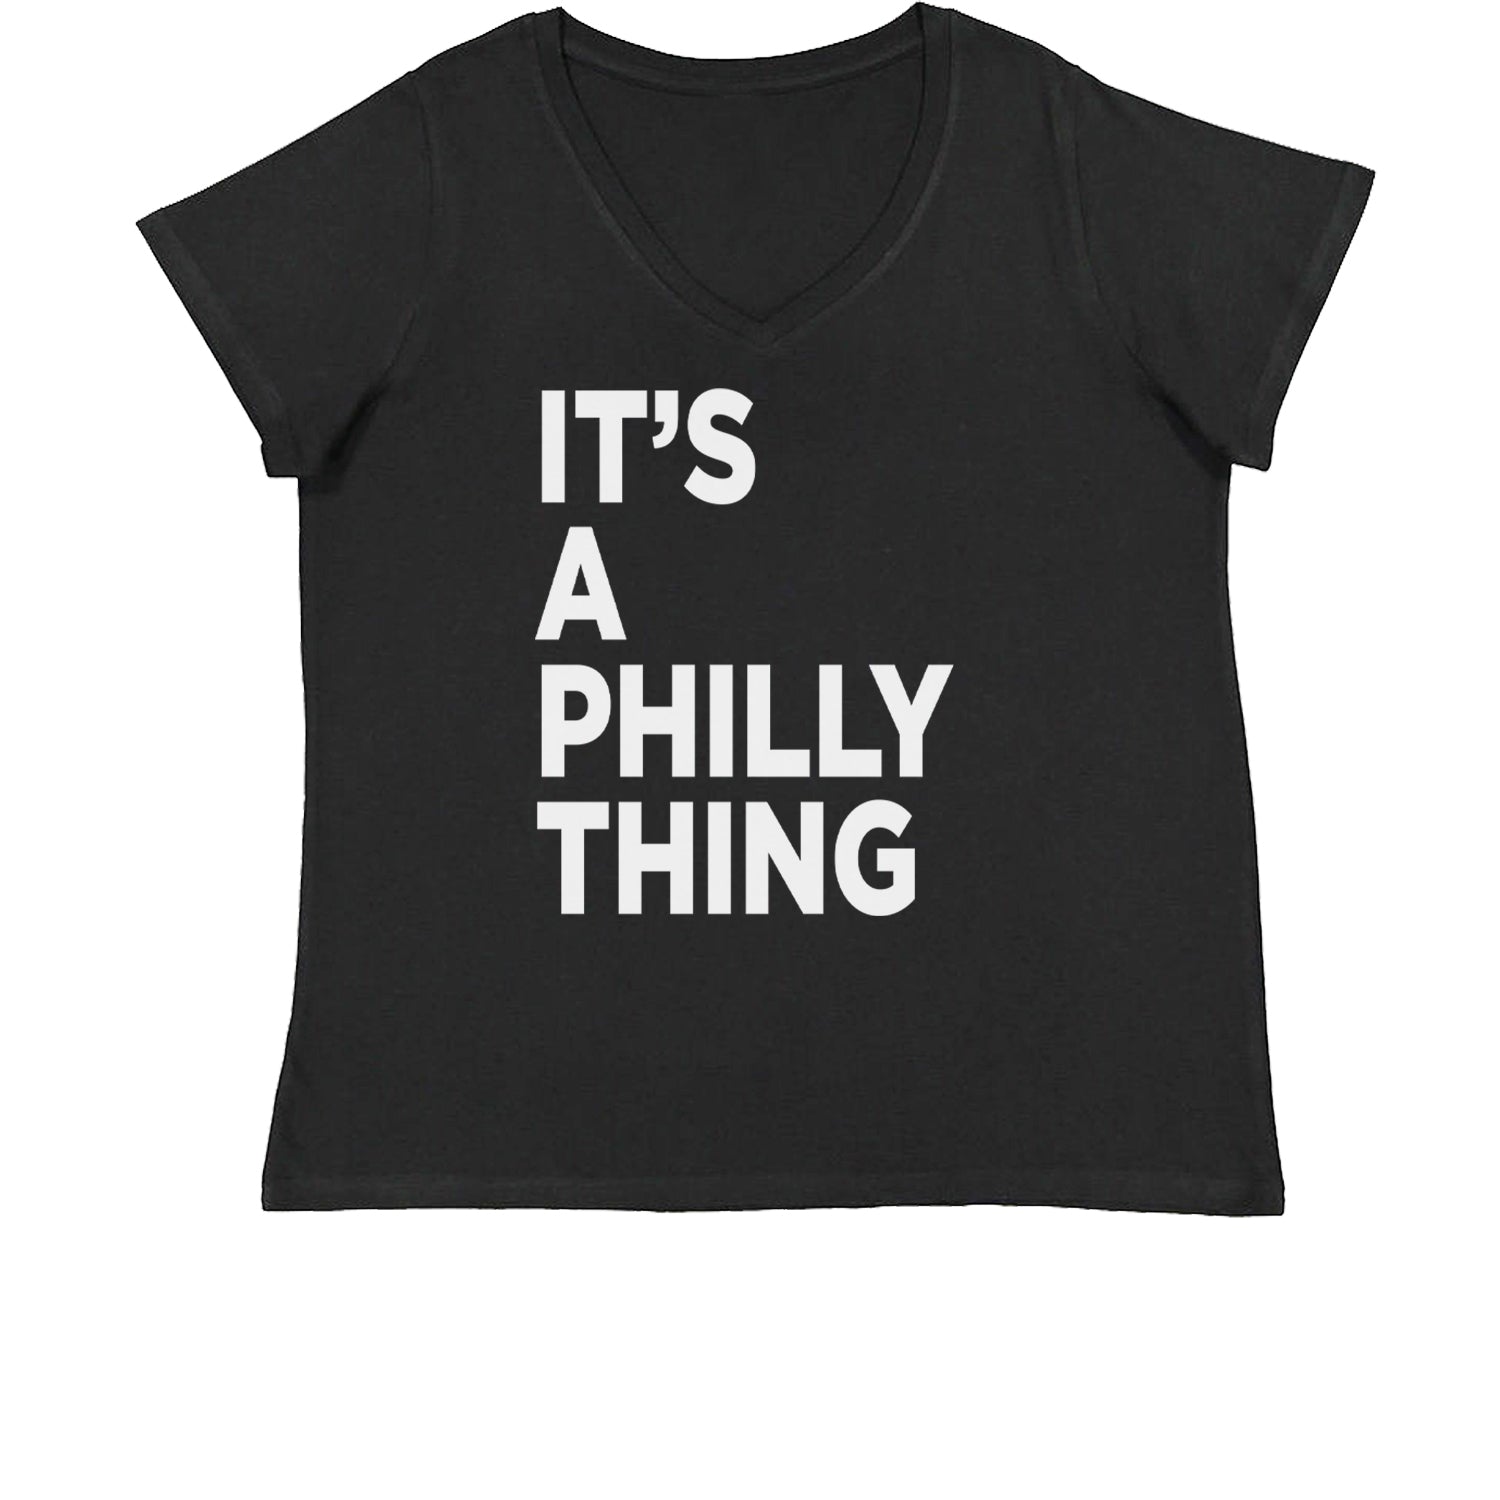 PHILLY It's A Philly Thing Womens Plus Size V-Neck T-shirt baseball, dilly, filly, football, jawn, morgan, Philadelphia, philli by Expression Tees